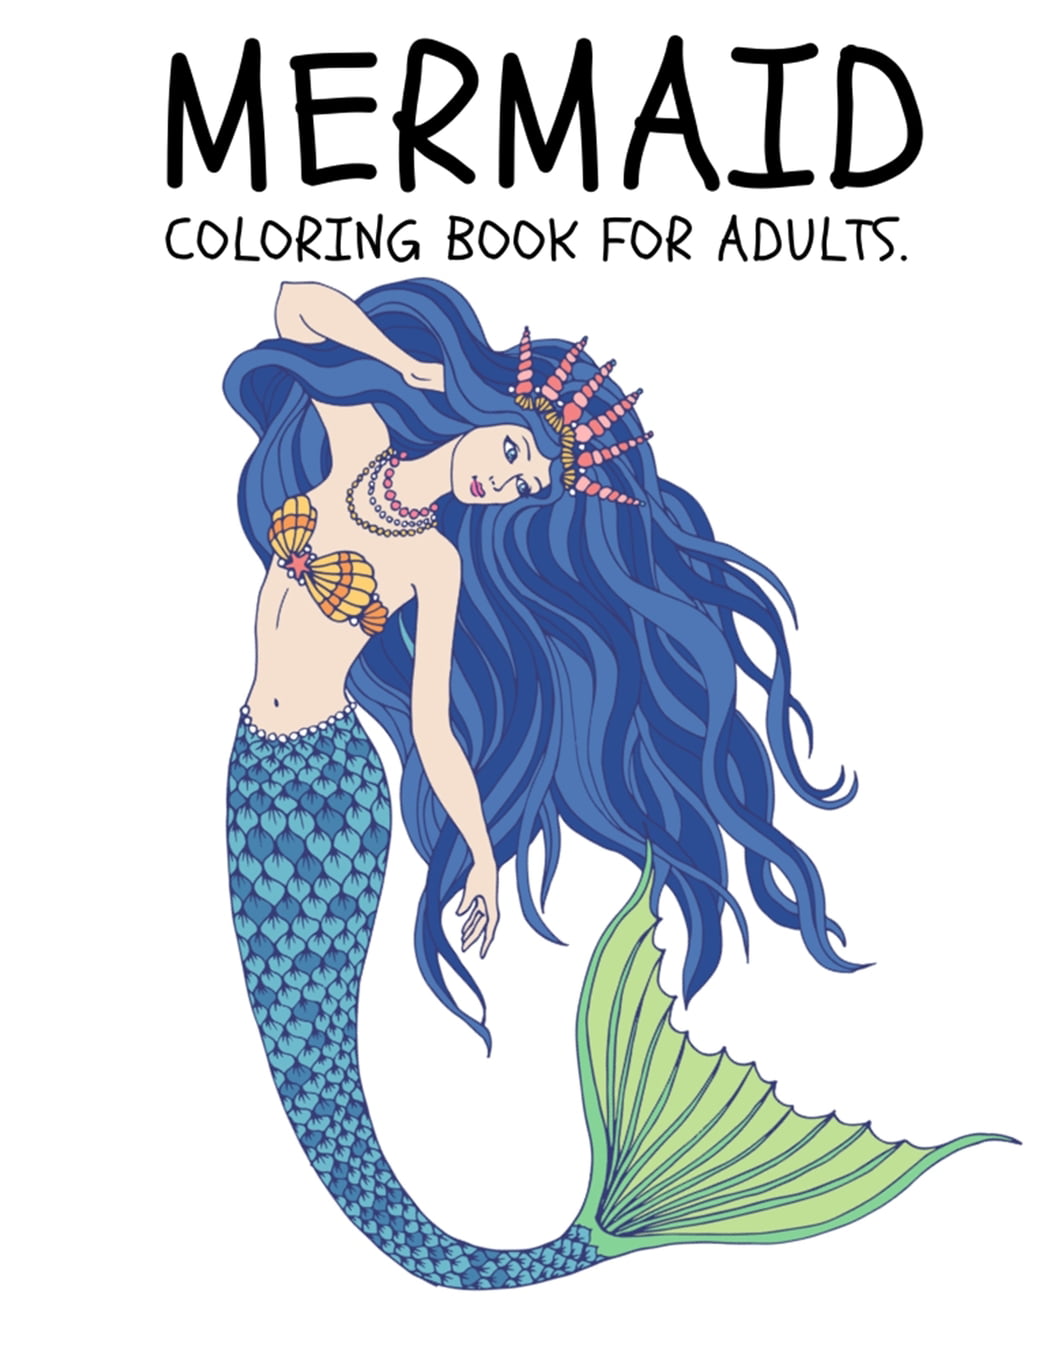 Download Mermaid Coloring Book For Adults Coloring Book For Kids And Adults Stress Relieving Adult Coloring Book With Beautiful Mermaids And Fantasy Scenes For Relaxation Paperback Walmart Com Walmart Com